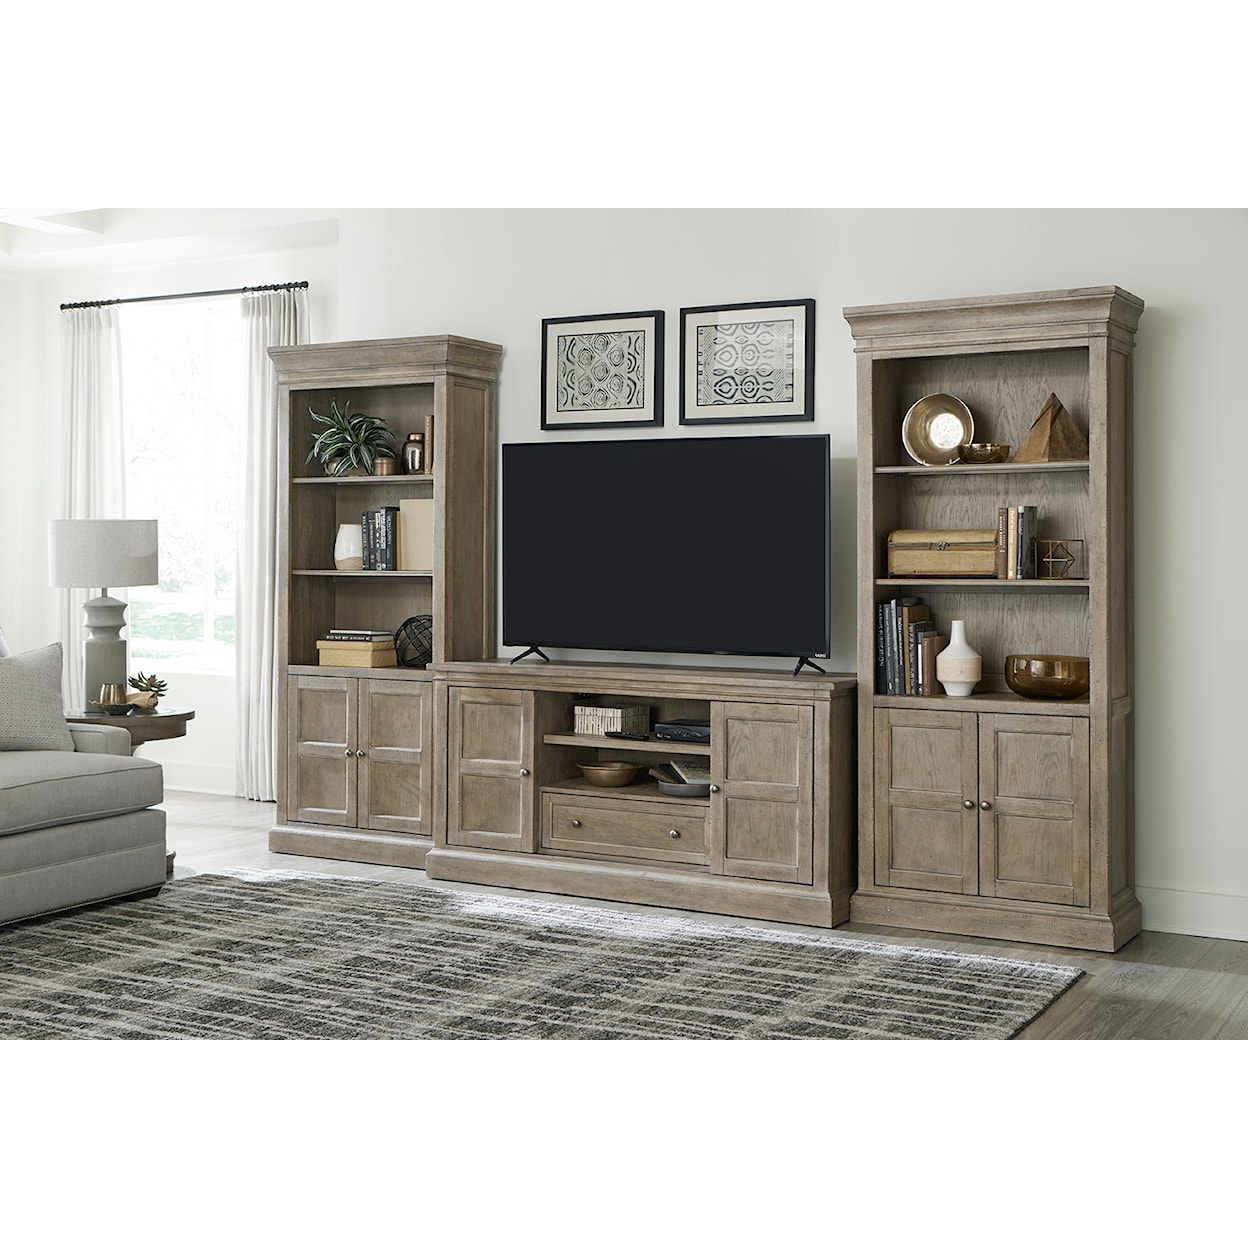 Hammary Donelson Media Console and Bookcases